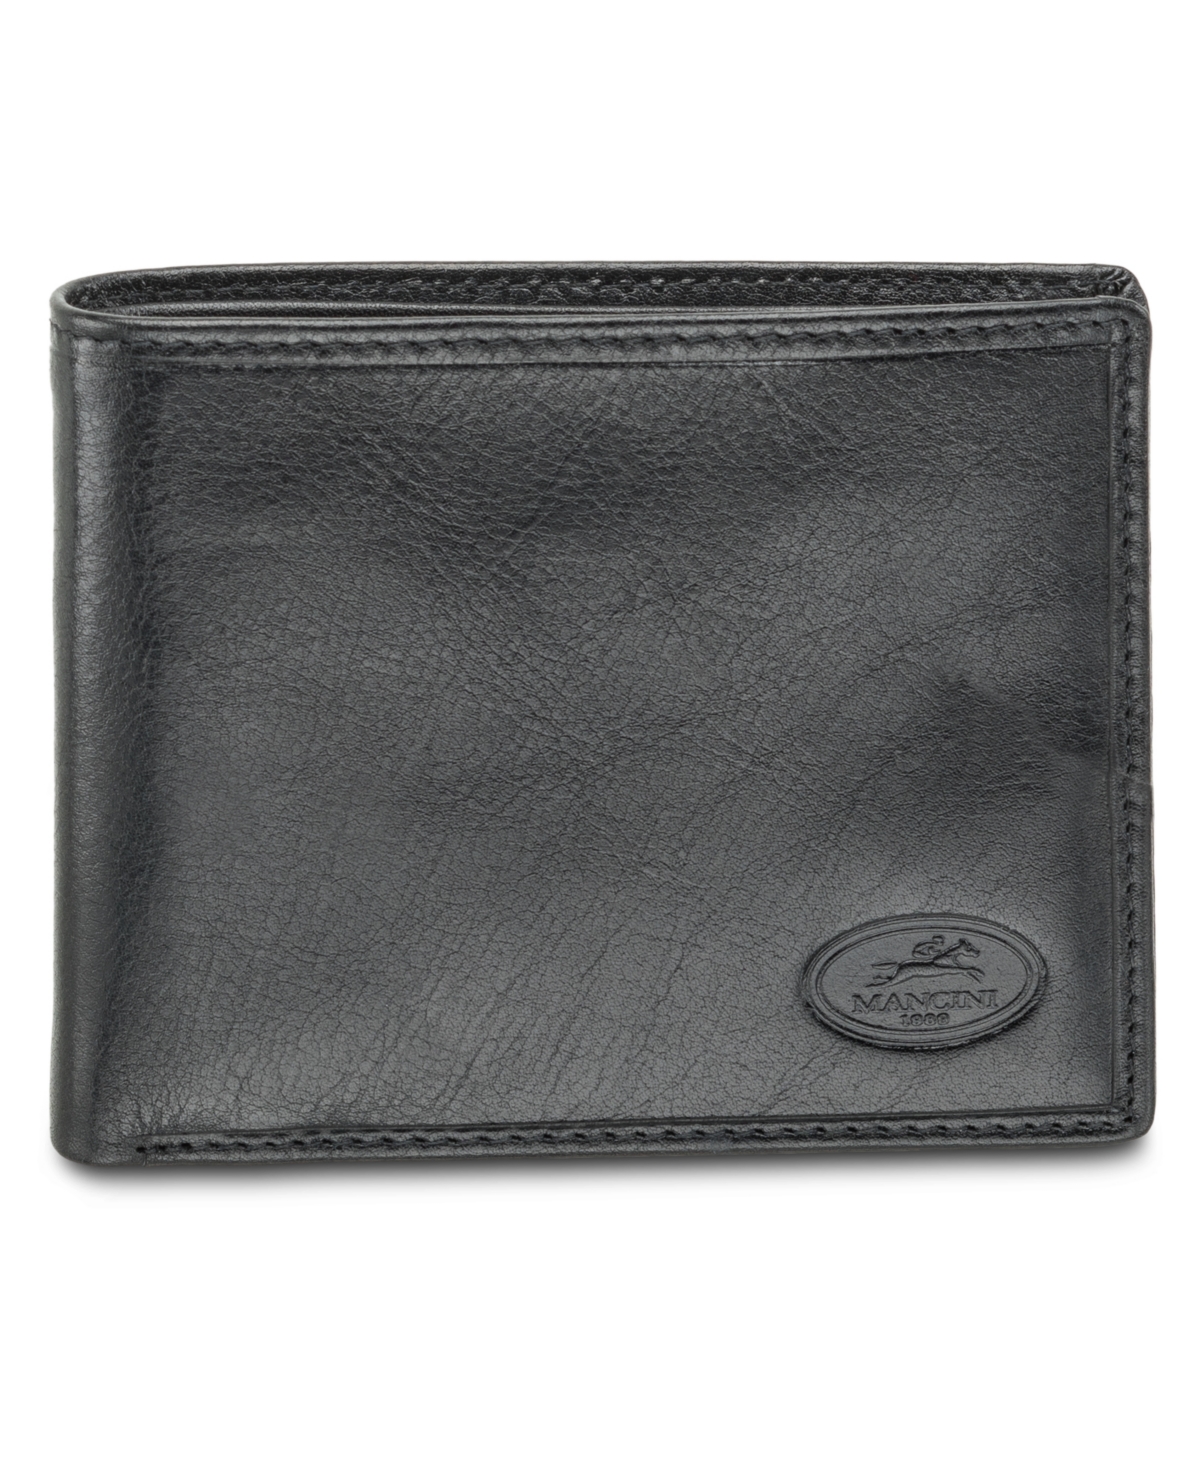 Men's Mancini Equestrian2 Collection Rfid Secure Classic Billfold Wallet - Black